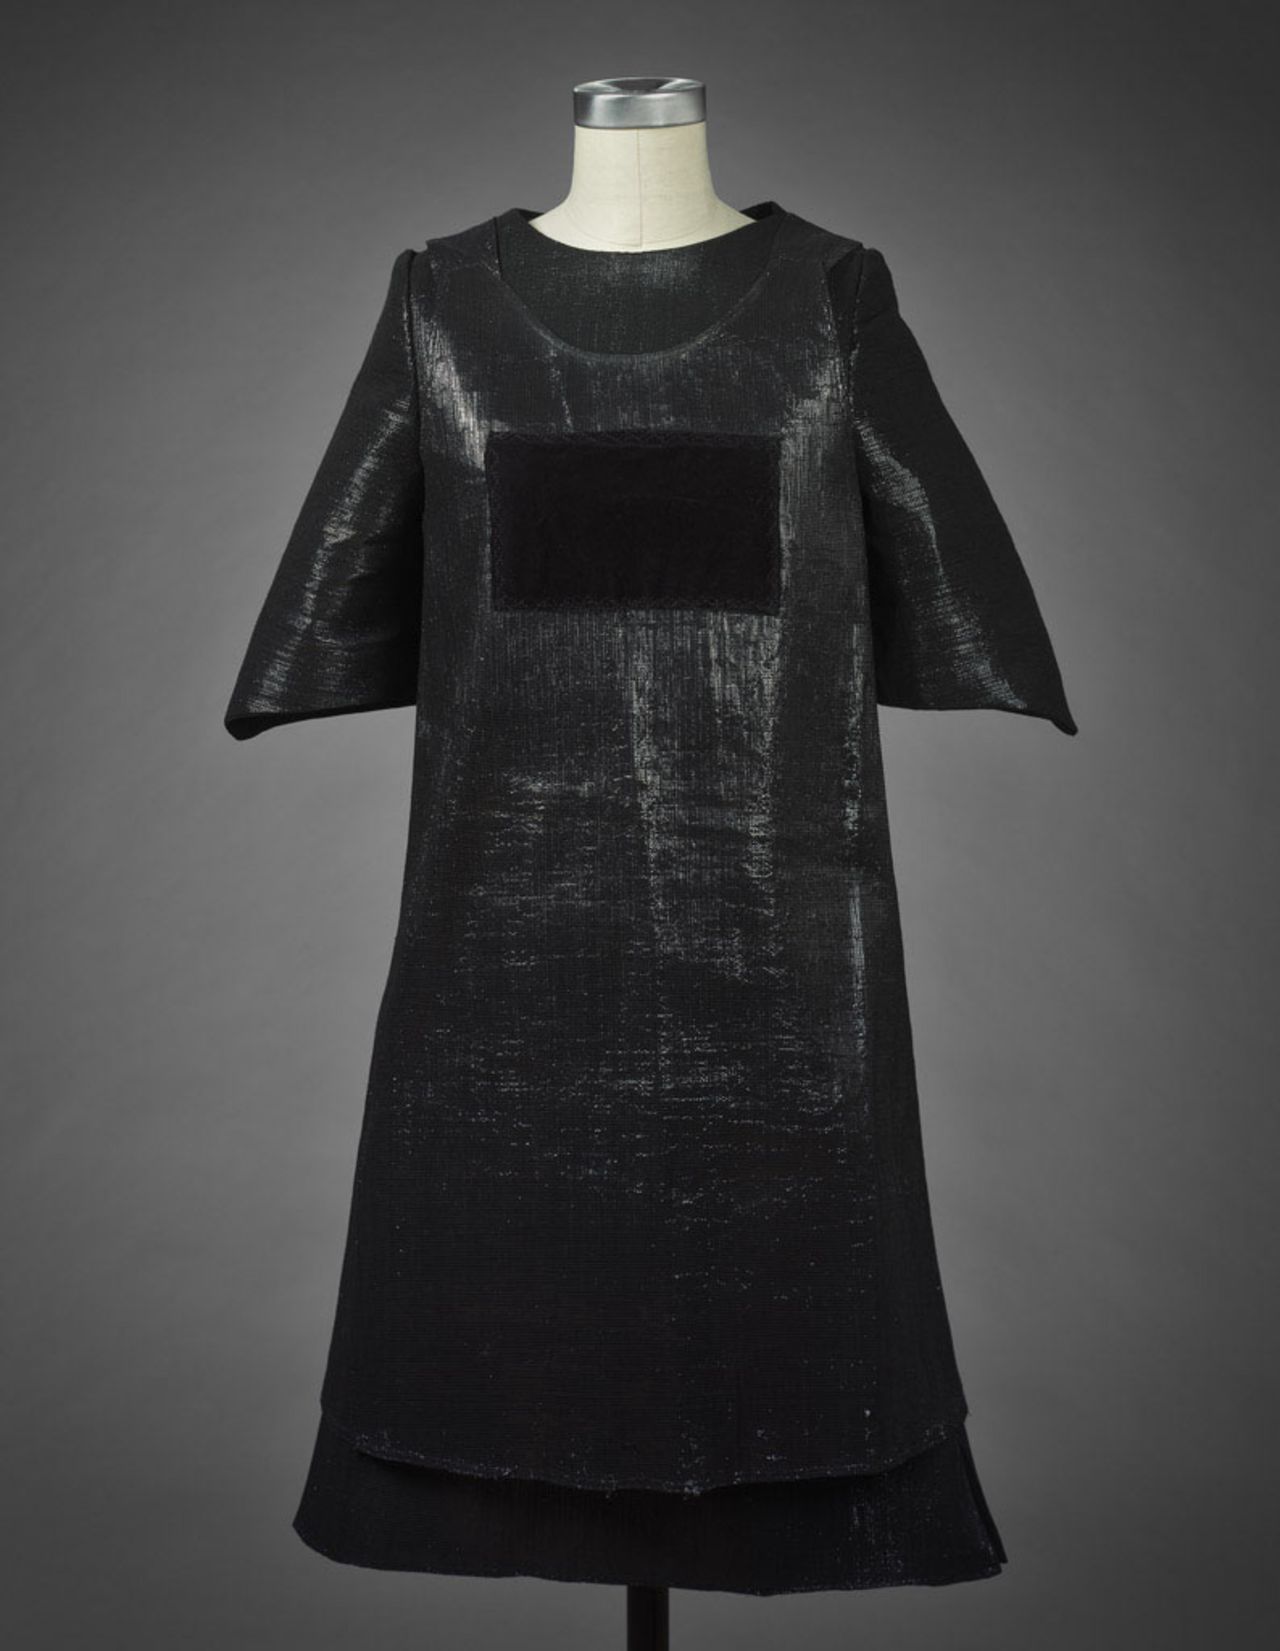 Sonic fabric 'voidness dress,' a one-piece A-line dress with a patch of velvet (or 'voidness') on the front. The velvet is the only part of the garment which cannot emit sound.